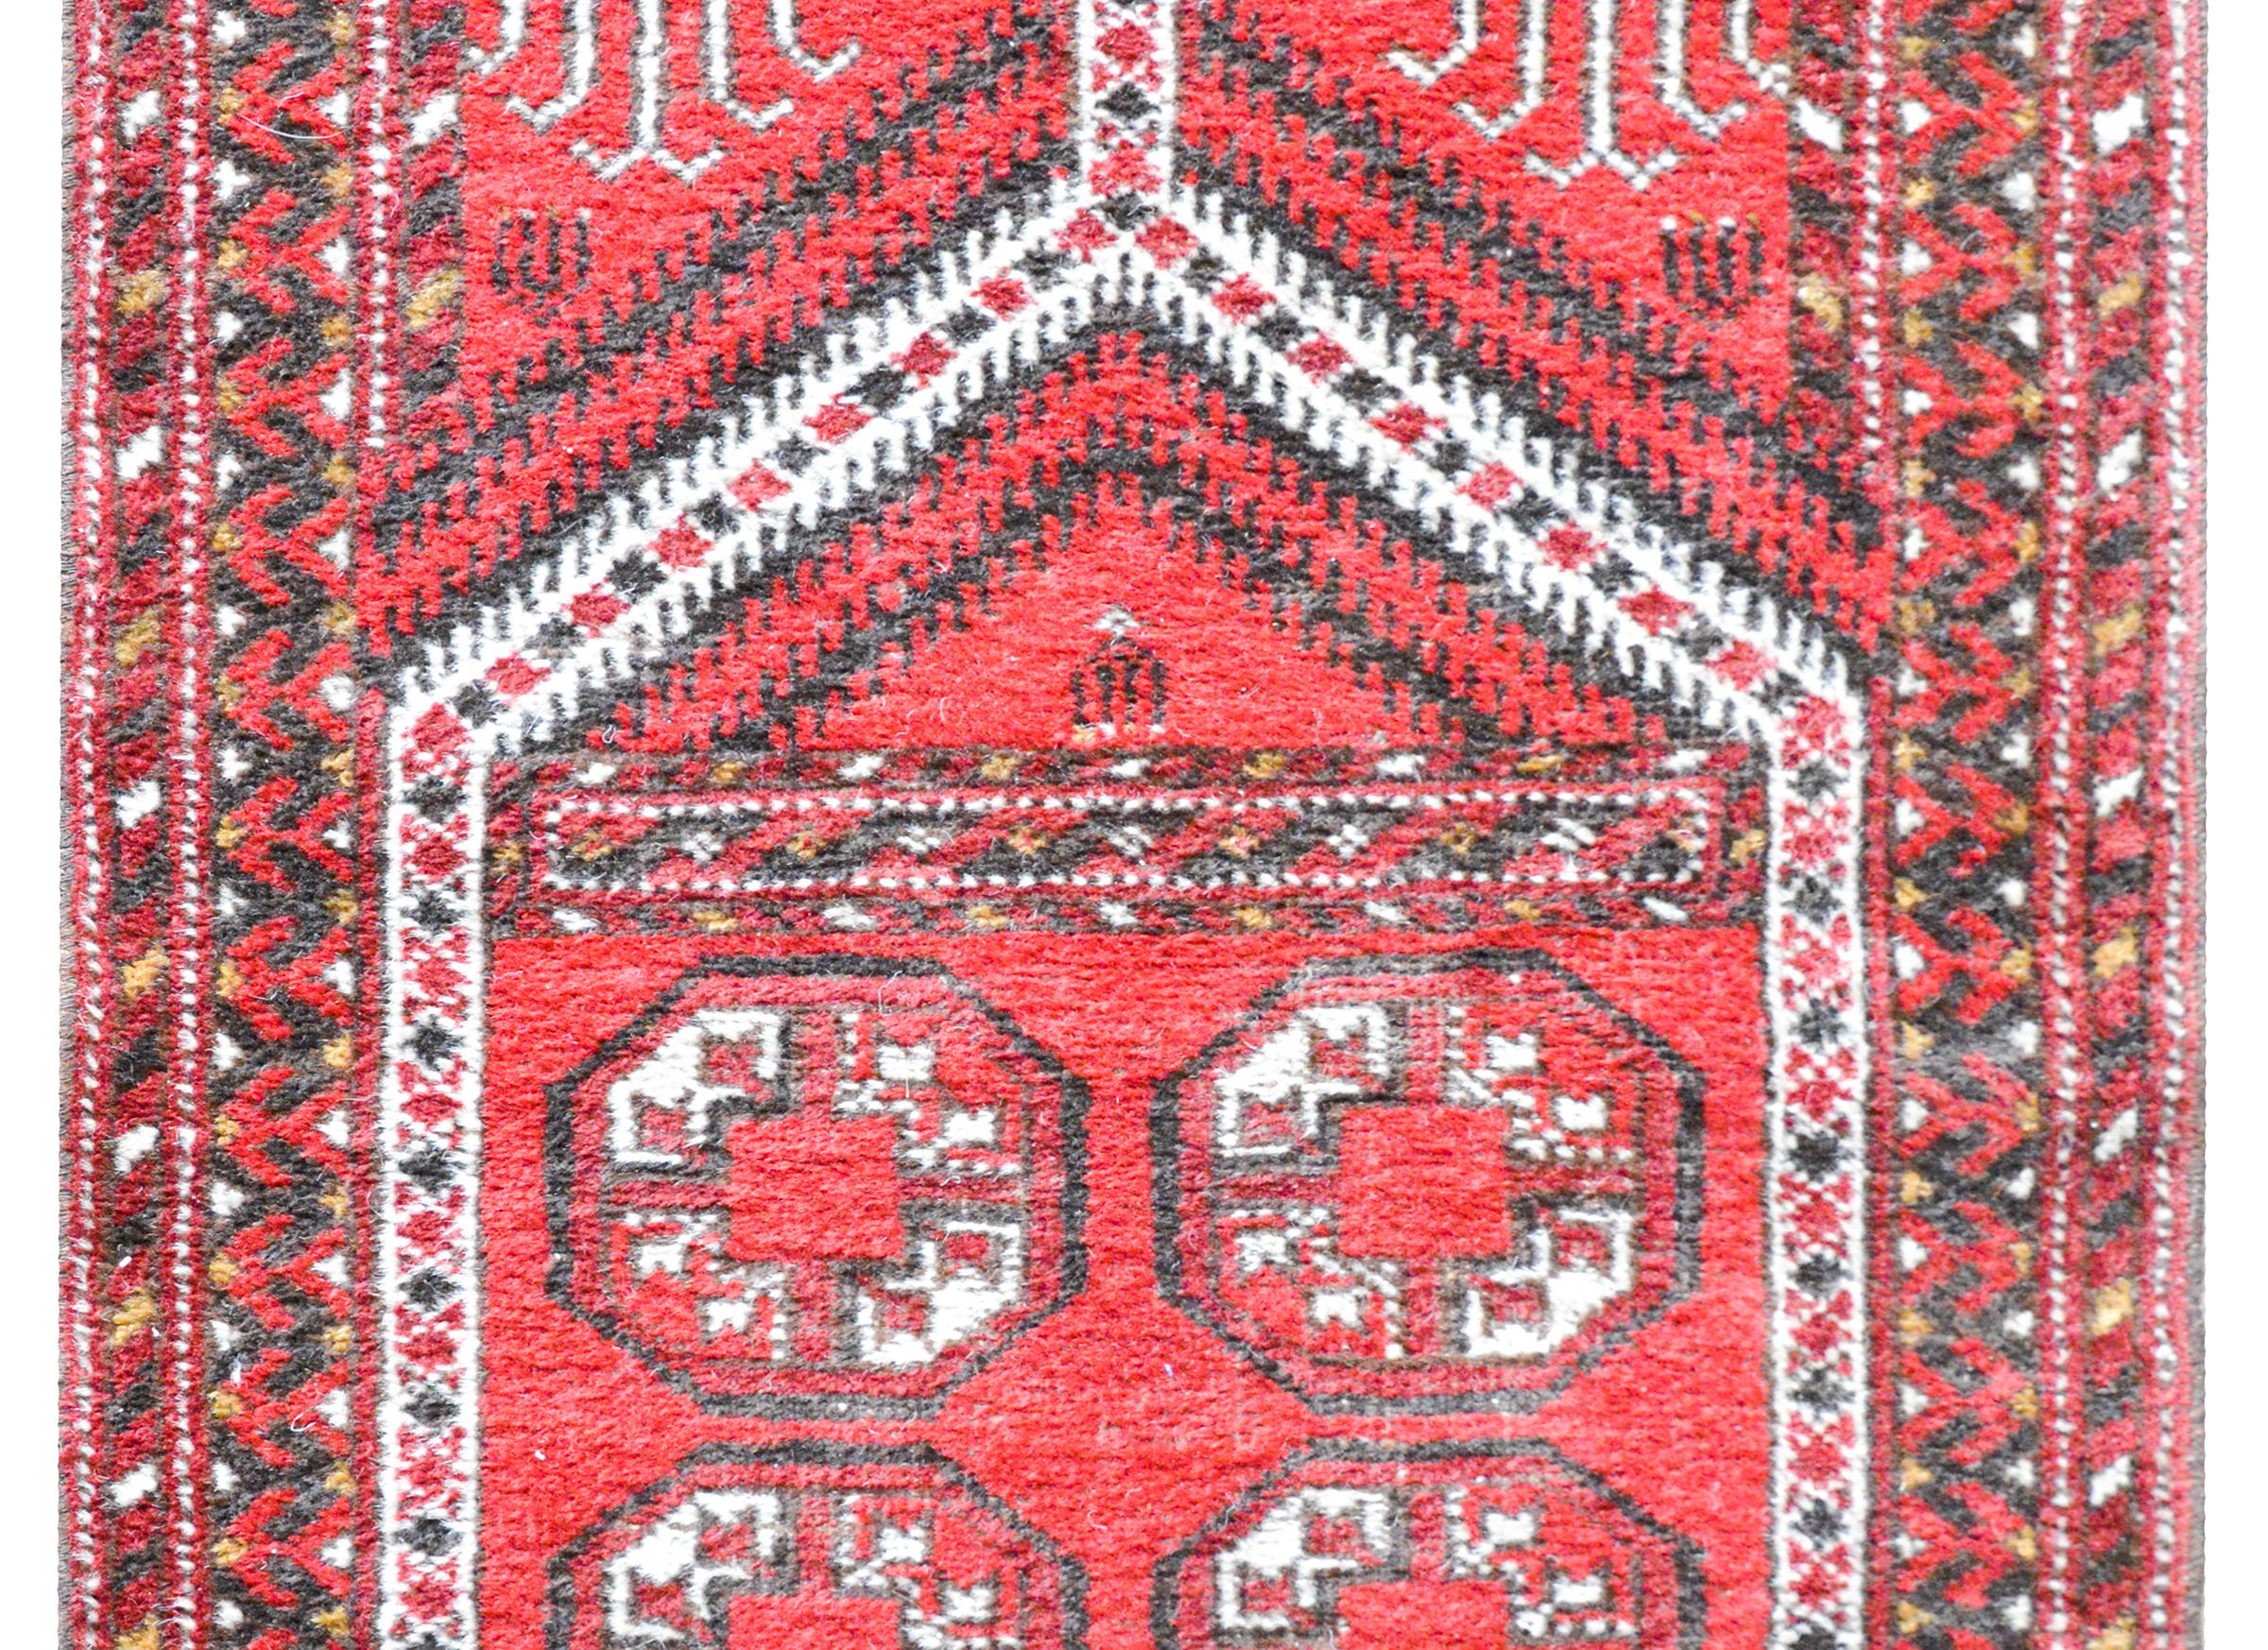 A wonderful vintage Afghani prayer rug with several geometric patterned stripes and medallions all woven in crimson, black, white, and gold, and surrounded by a border composed of multiple petite floral partnered stripes.